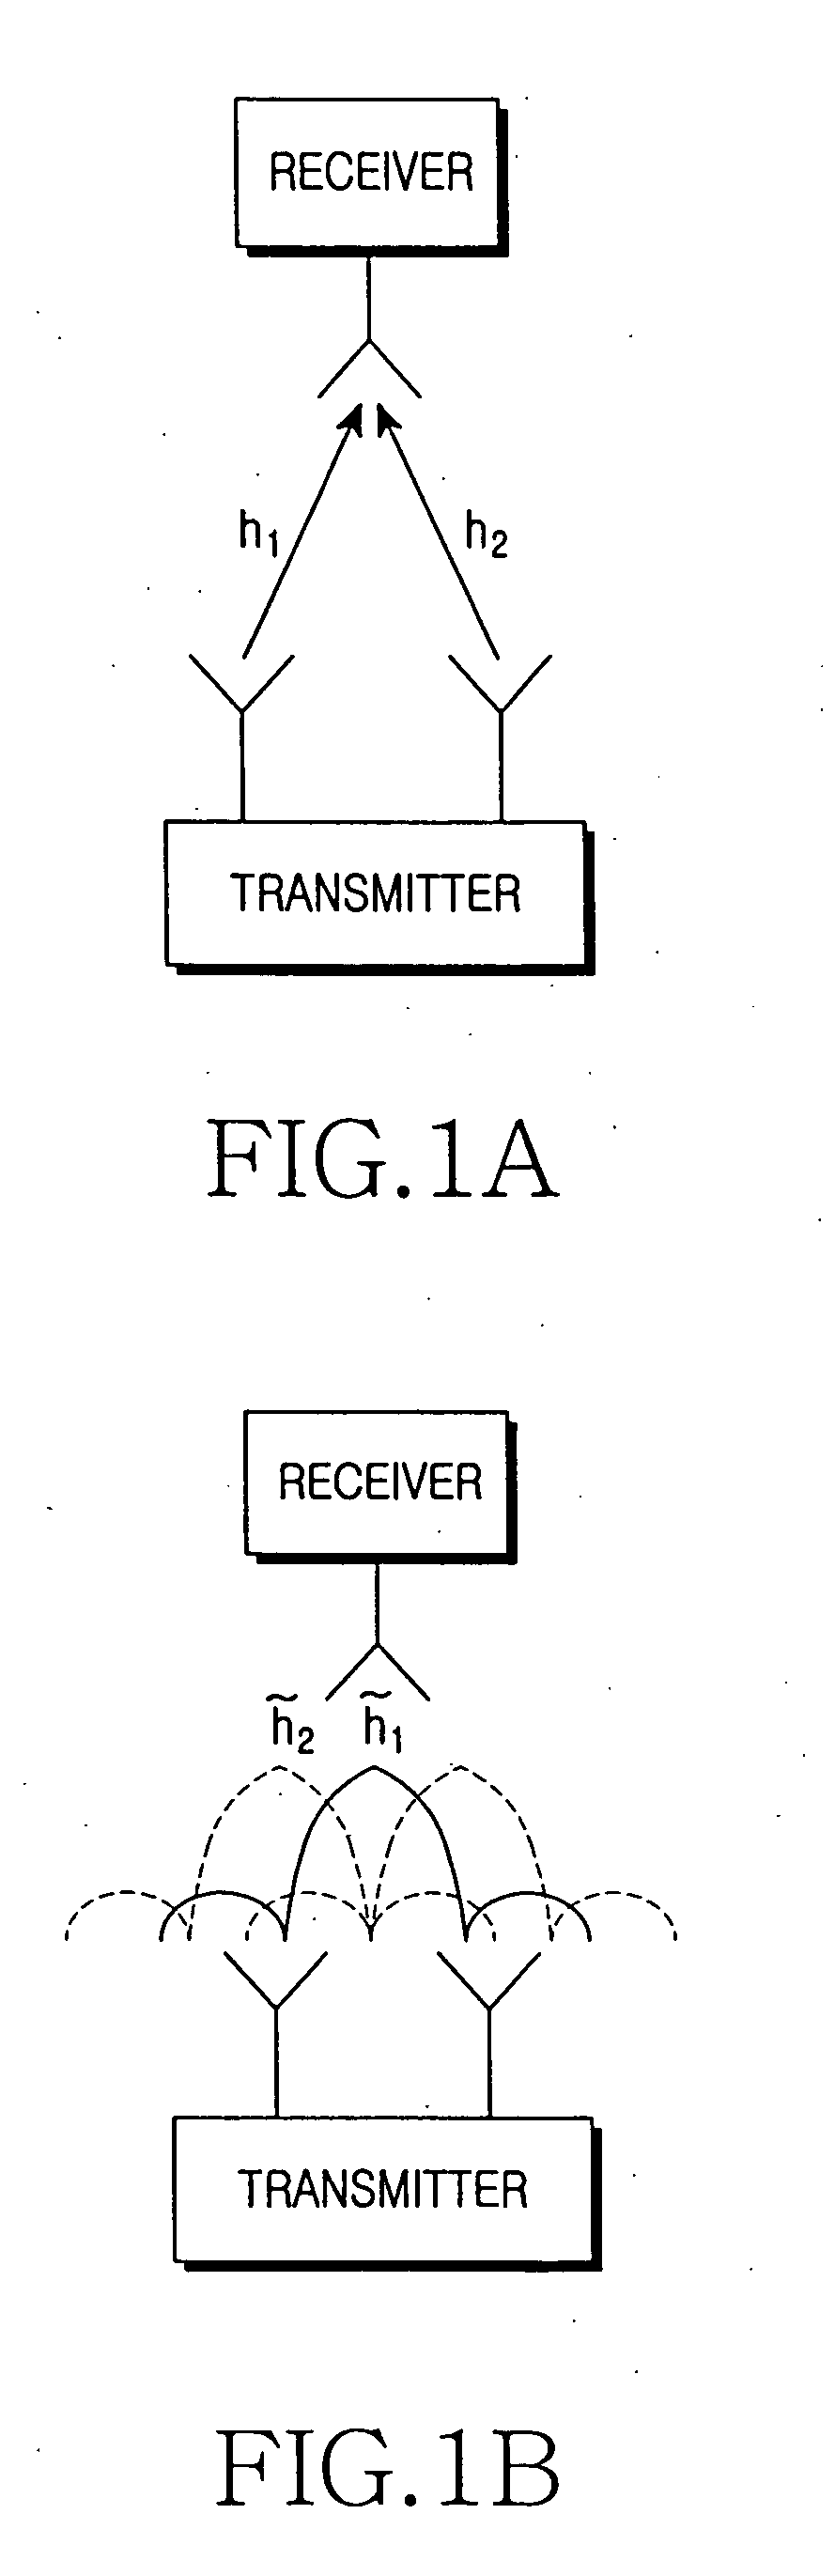 Apparatus and method for providing transmit diversity in a mobile communication system using multiple antennas